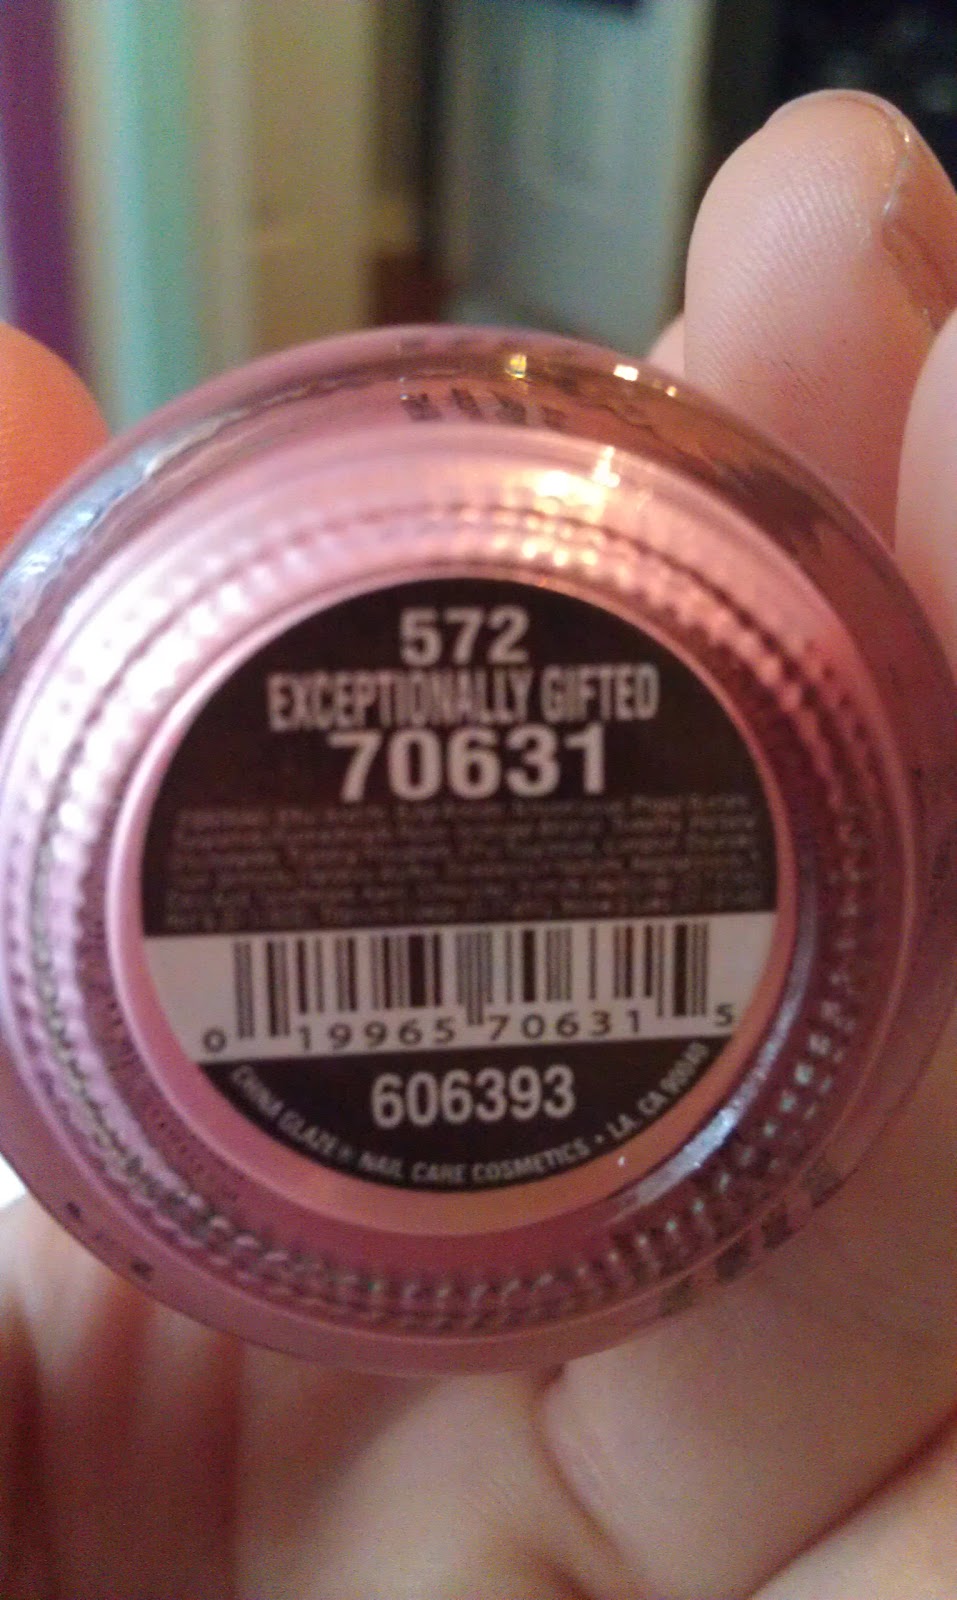 More Details; Usage Tips; Ingredients; Reviews. Professional 220-strand brush  .. A product thumbnail of China Glaze Exceptionally Gifted Exceptinally Gifted.